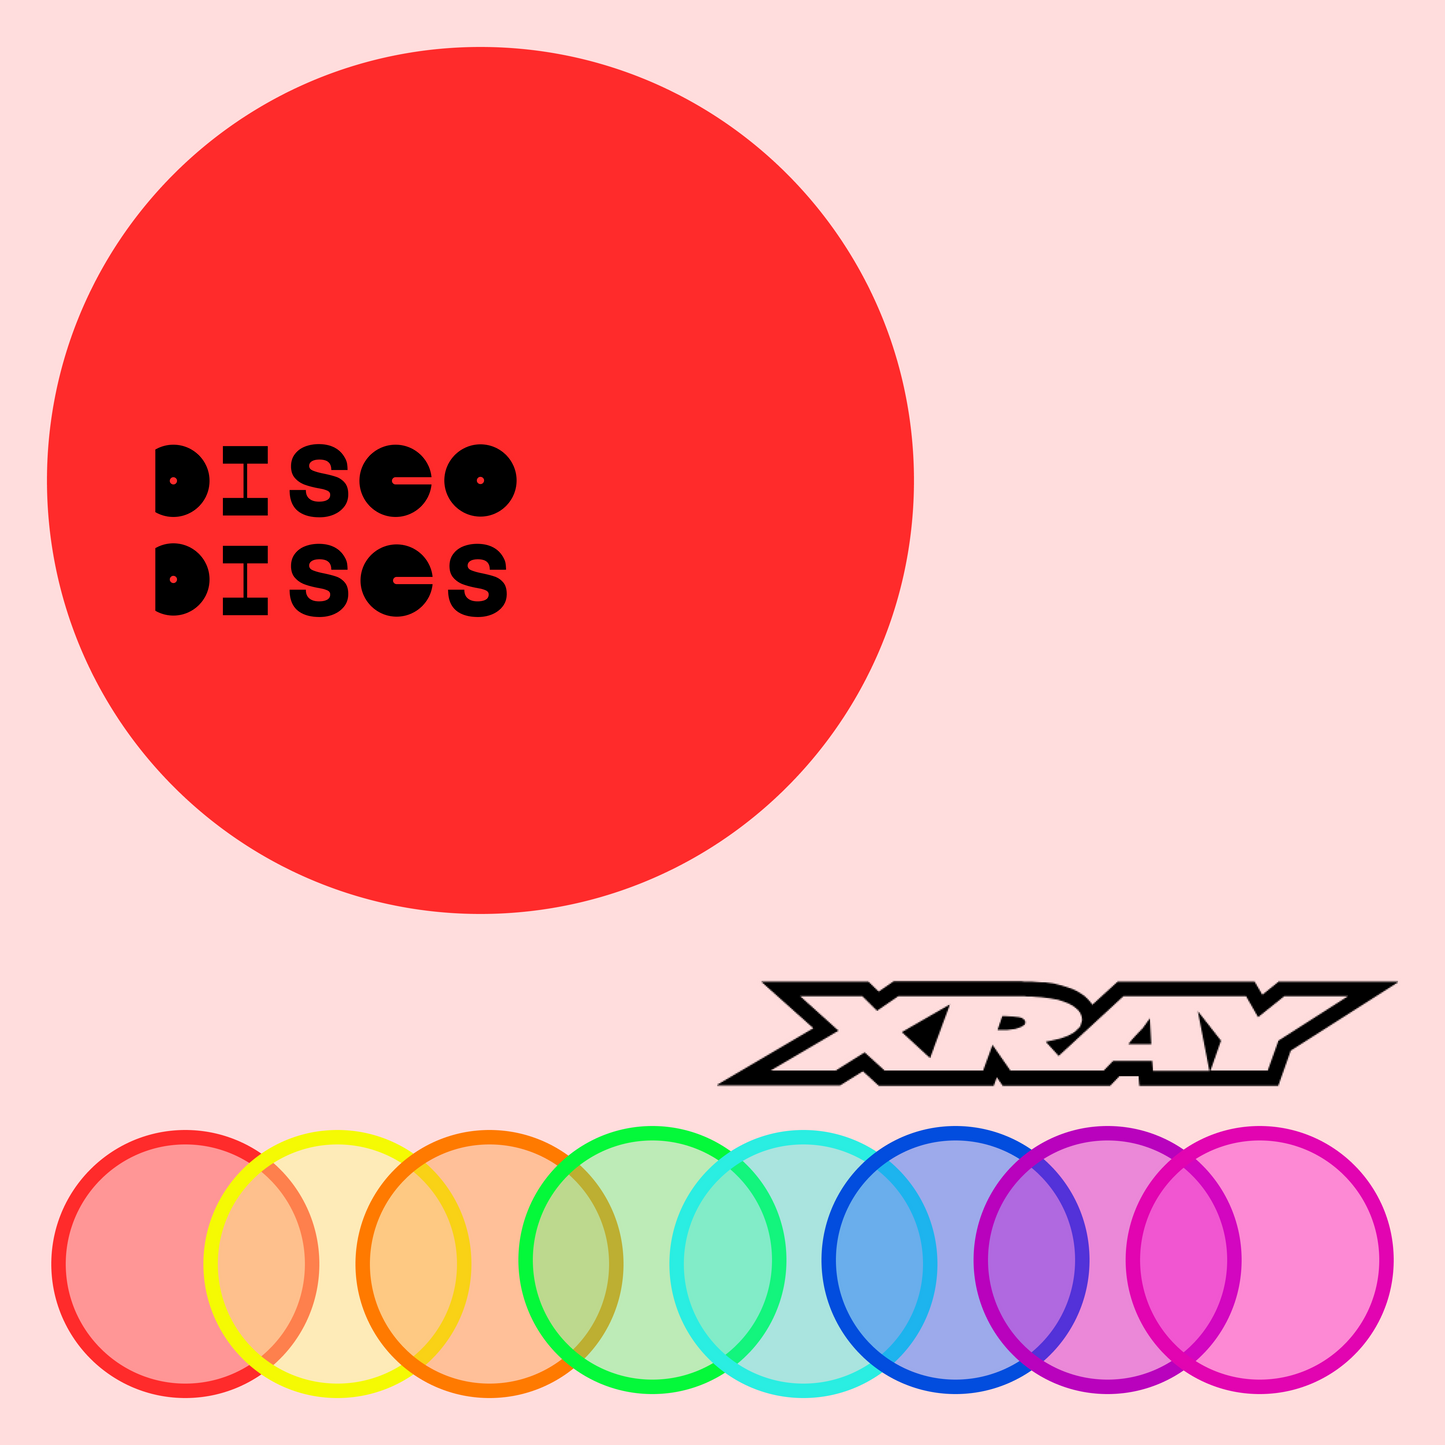 5. Xray — 2WD or 4WD full sets of Disco Discs wheels — Choose Your Colour